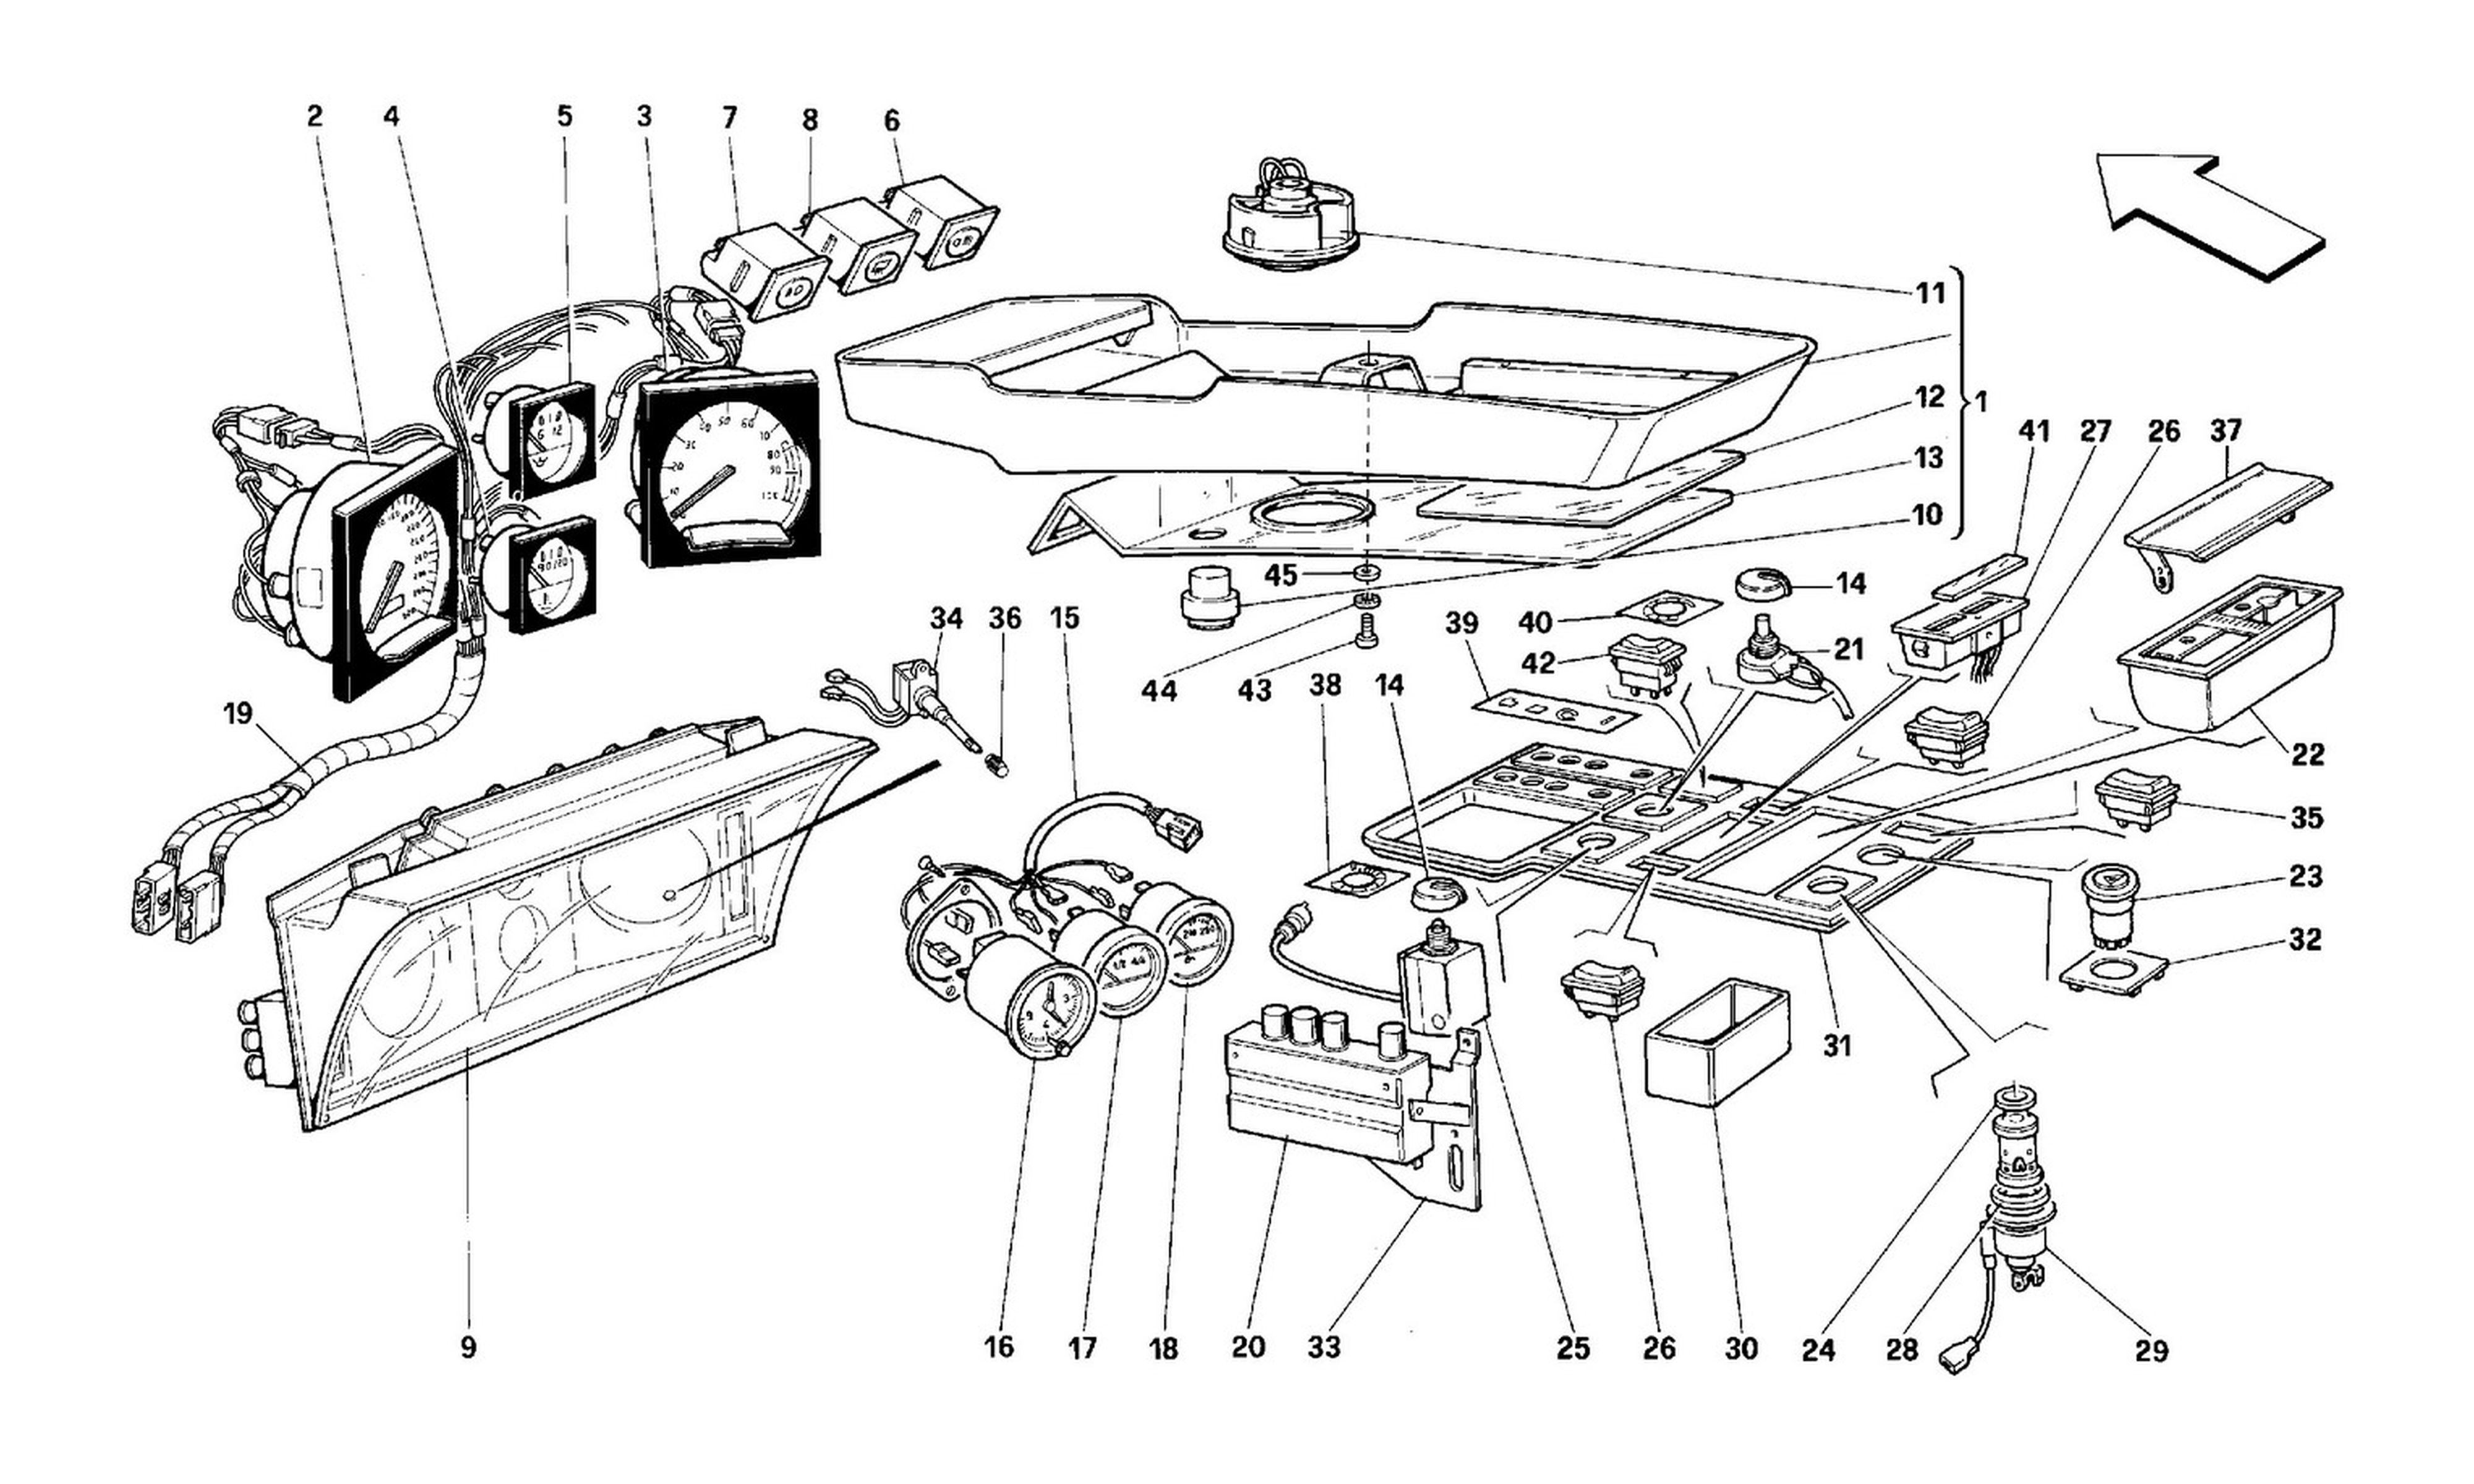 Schematic: Instruments And Passenger Compartment Accessories